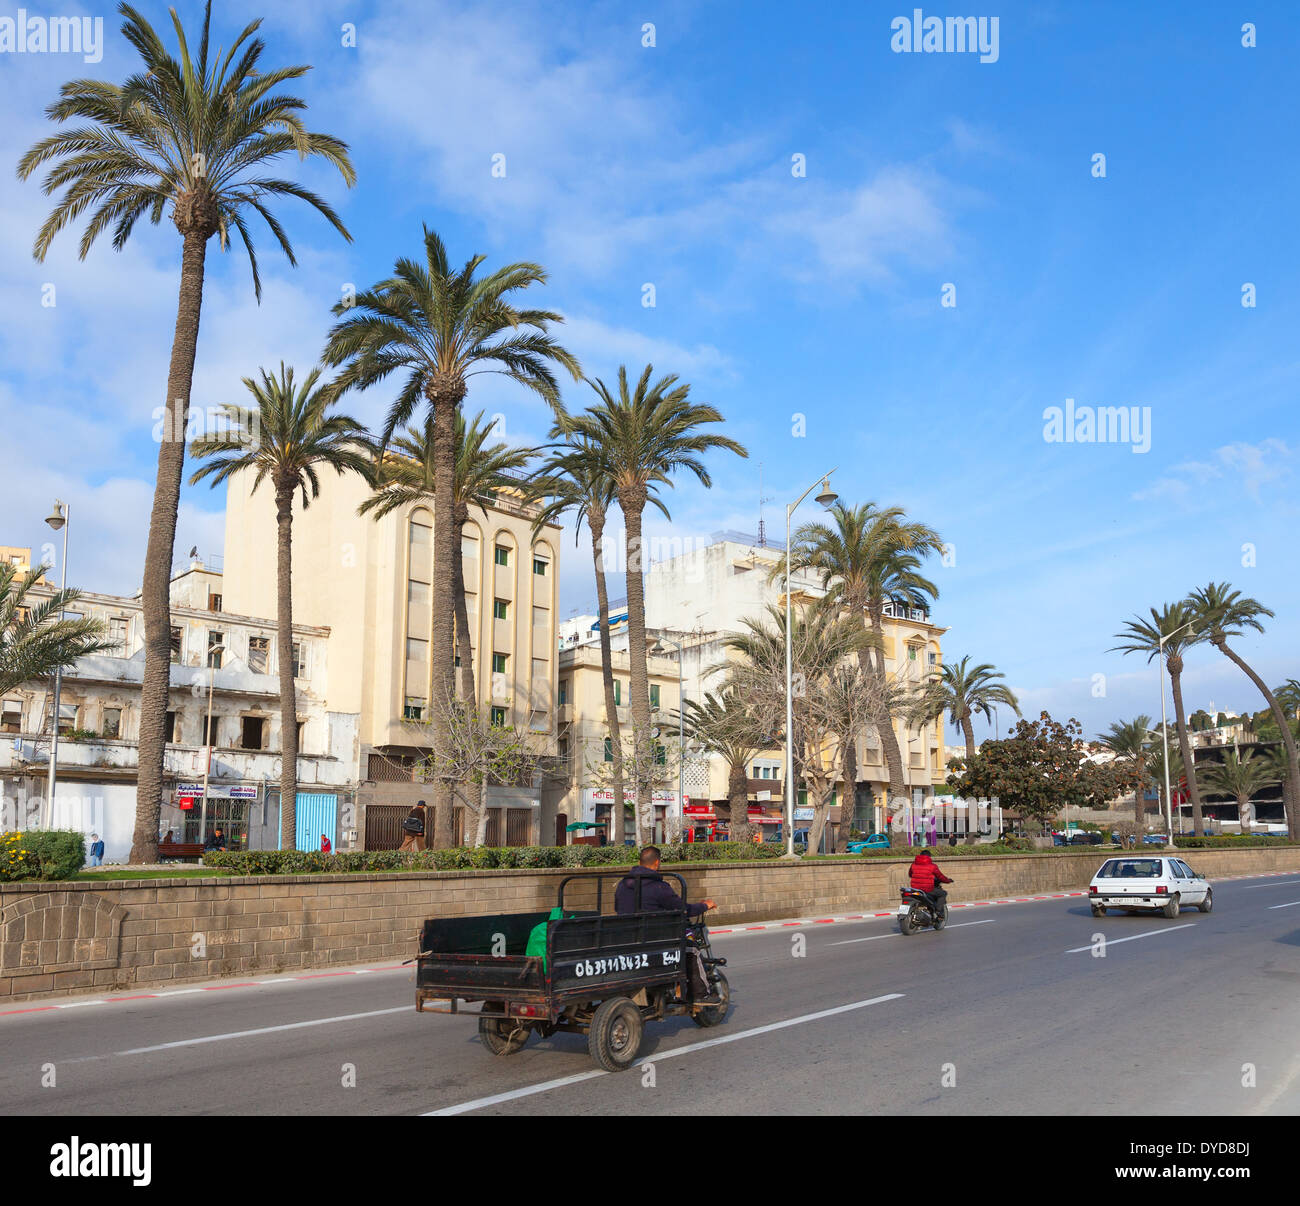 TANGIER, MOROCCO - MARCH 22, 2014: Old tricycle cargo bike with Arab driver rides on the street of  Tangier Stock Photo